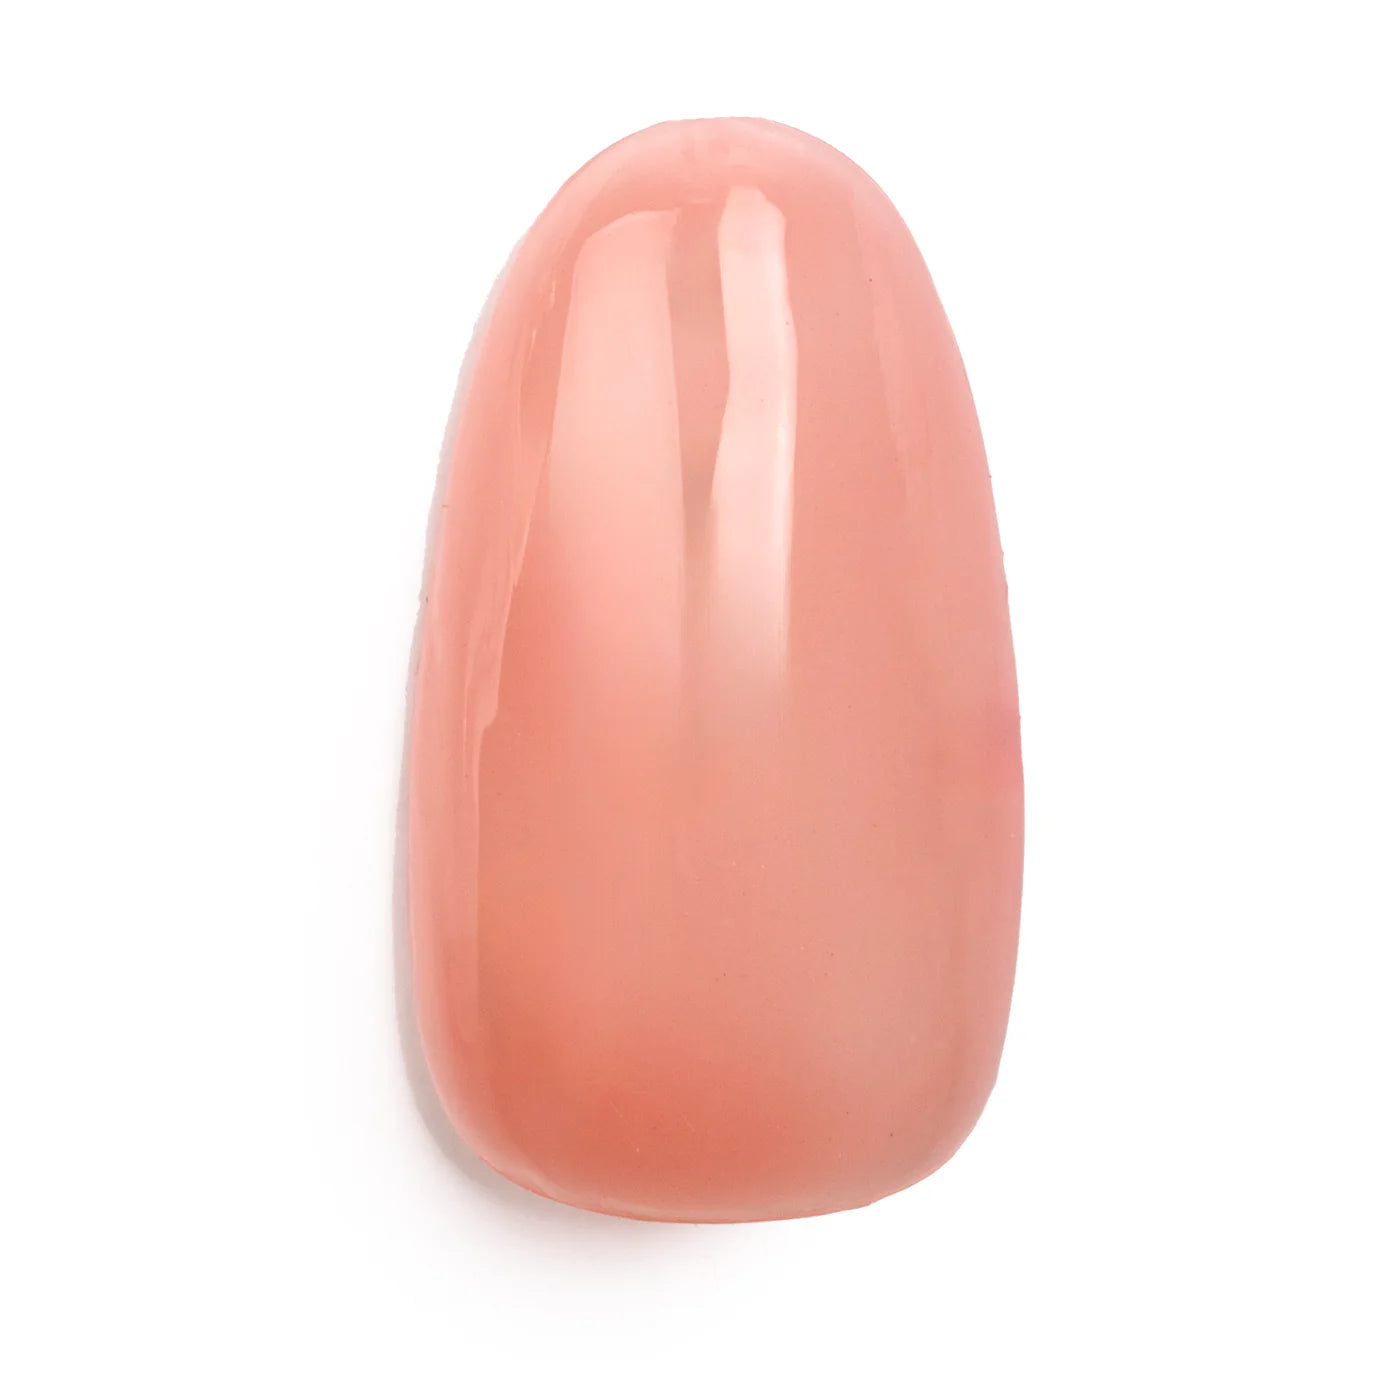 ATL- Nude Pink - Orly Builder in a Bottle (0.6oz)